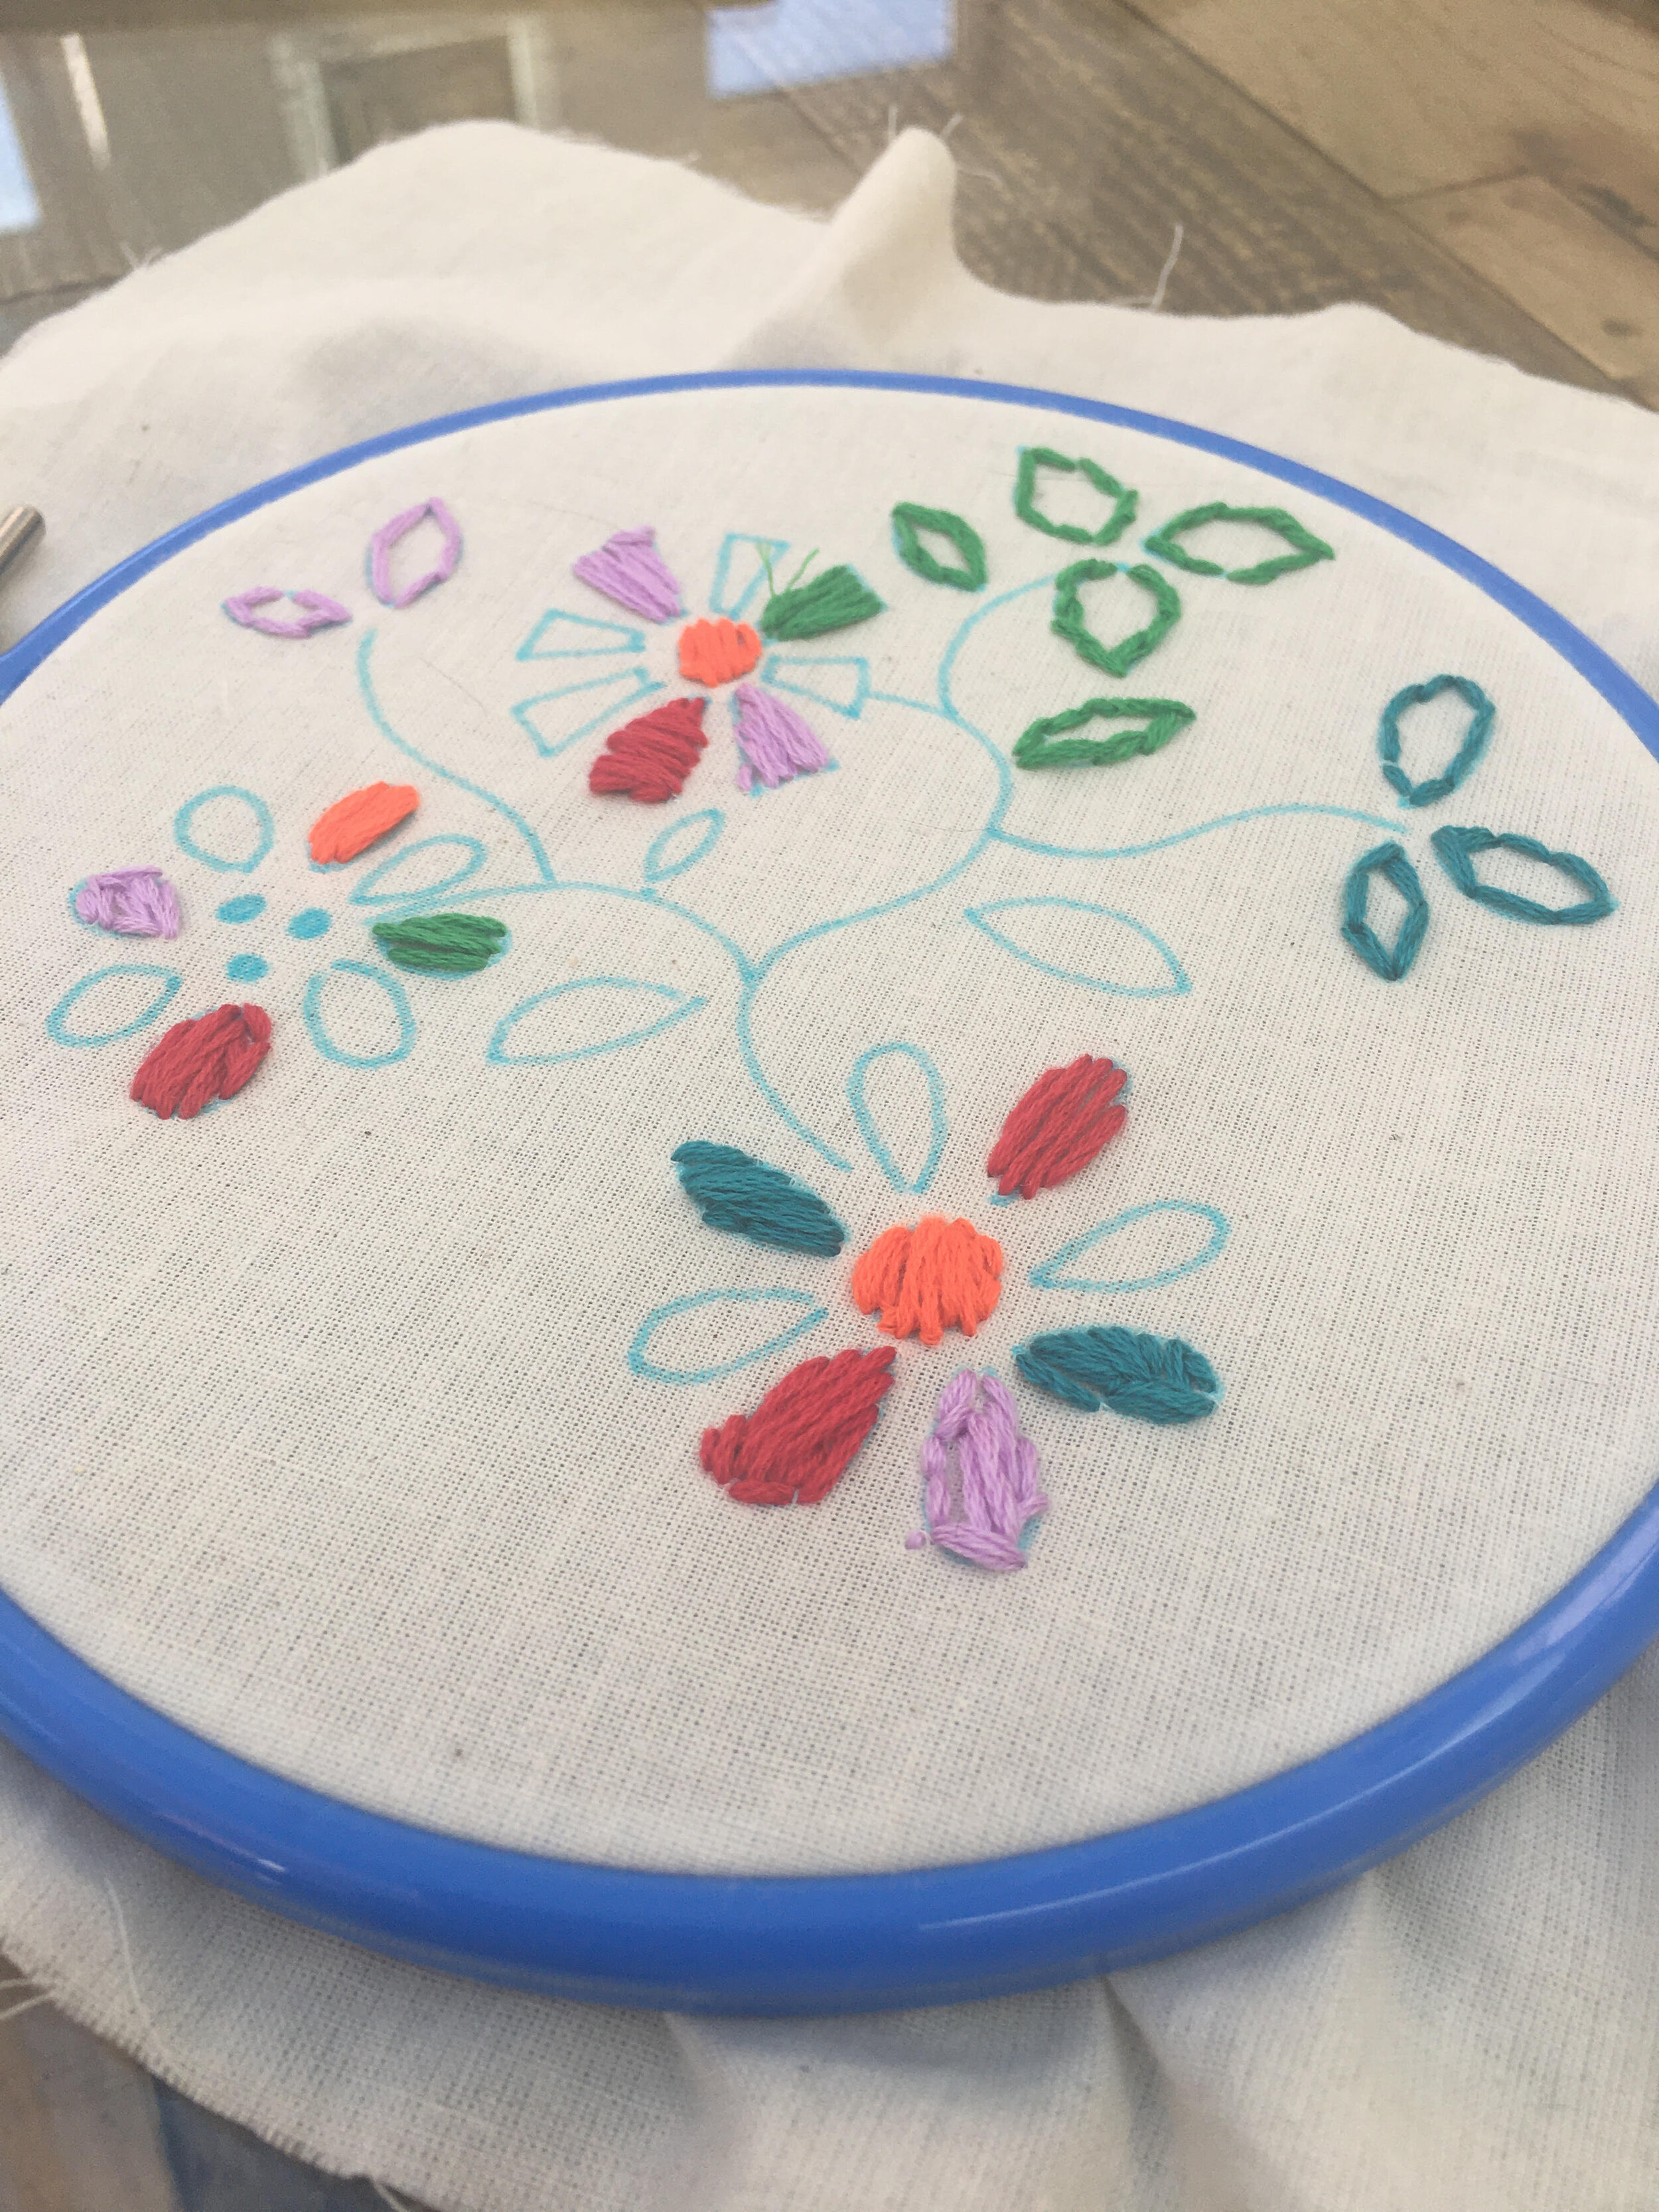 participant embroidery 3 .jpeg